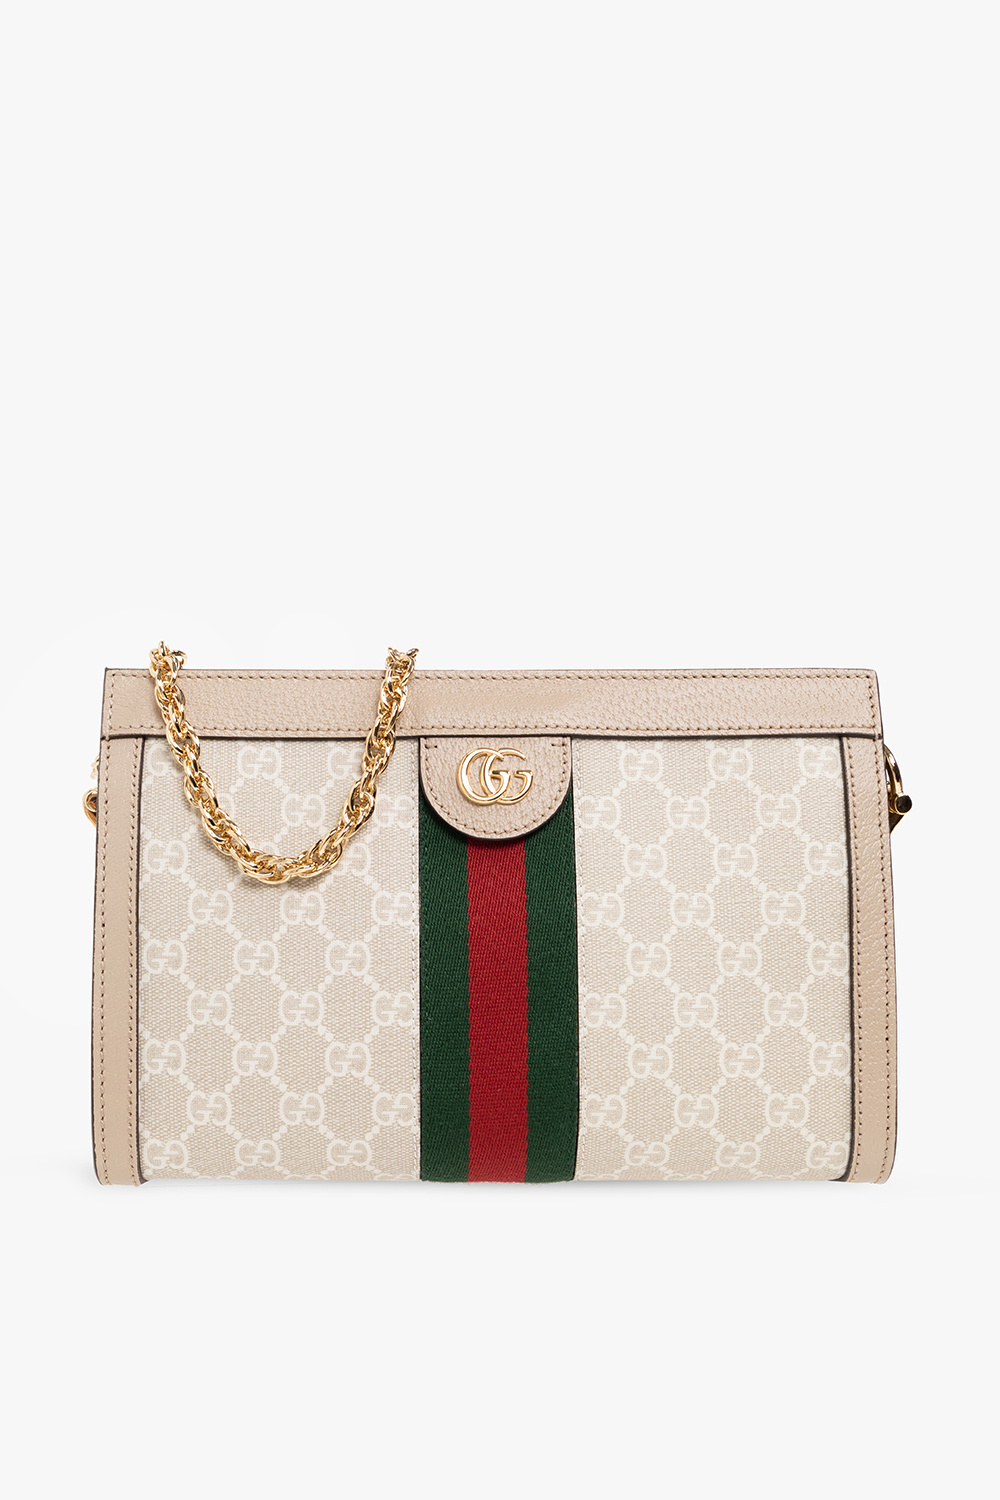 Gucci Ophidia Flora GG Small Supreme Canvas Shoulder Bag 503877 Pre Owned